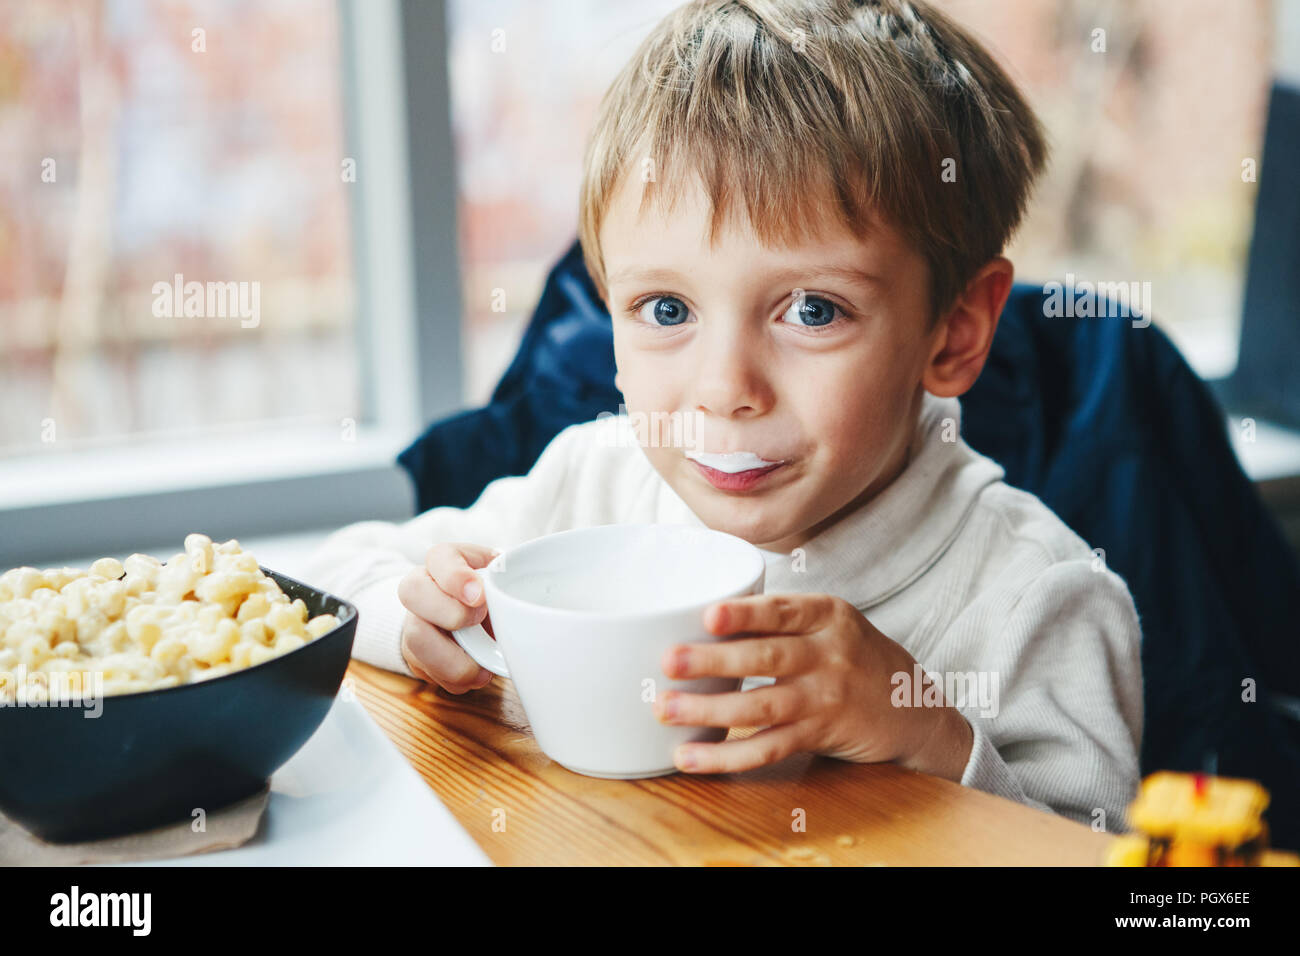 Portrait of cute adorable Caucasian child kid boy drinking milk from white cup eating breakfast lunch early morning, everyday lifestyle candid moments Stock Photo